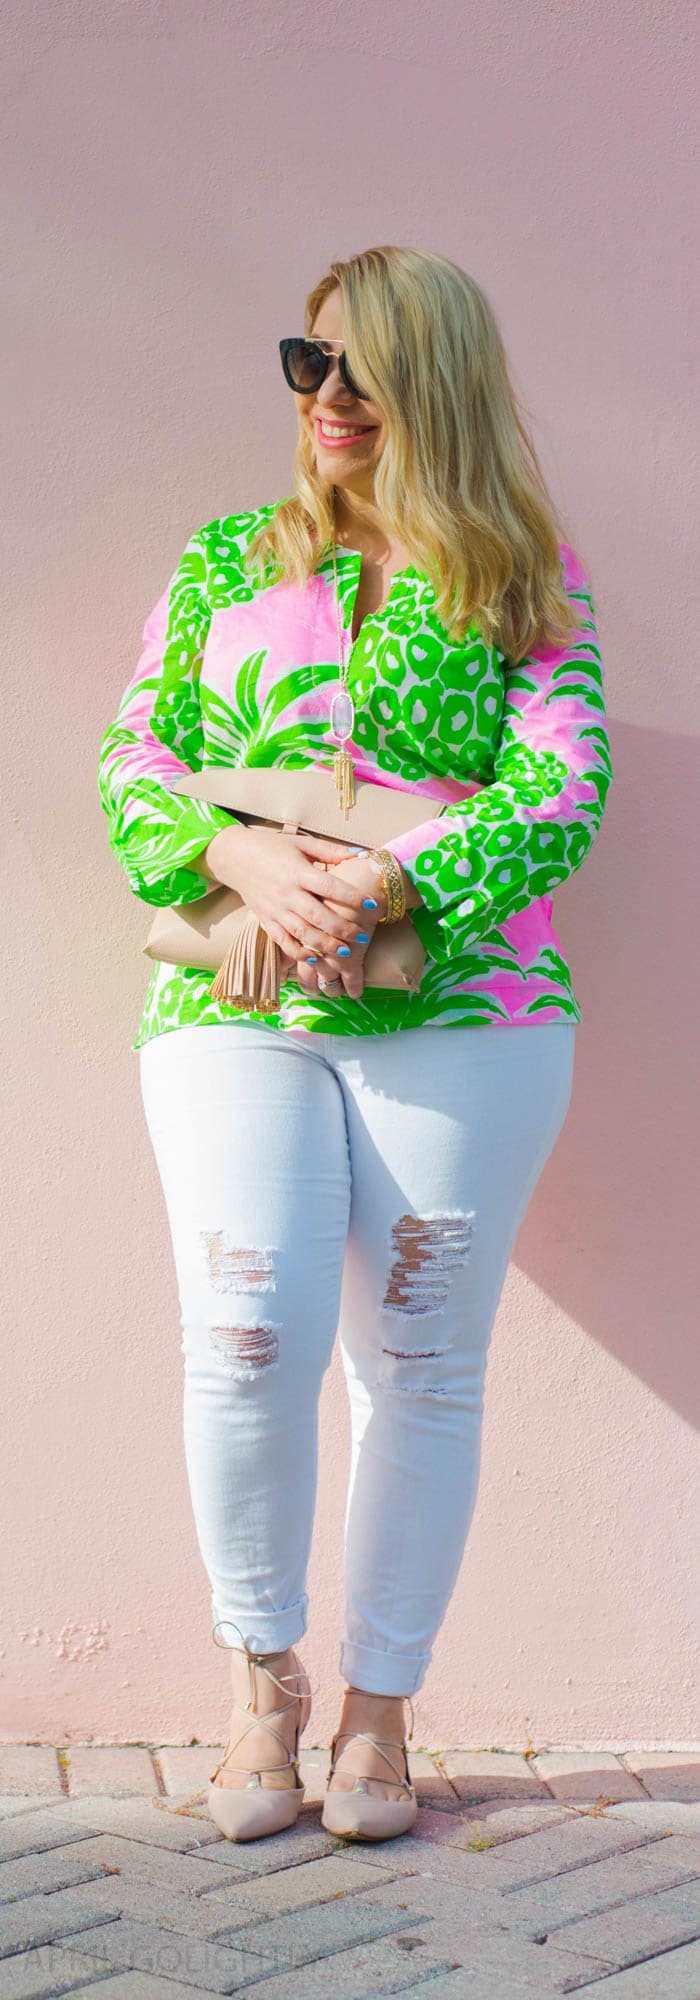 Cooler in Cotton Lilly Pulitzer Tunic Top and white jeans (1 of 1)-2